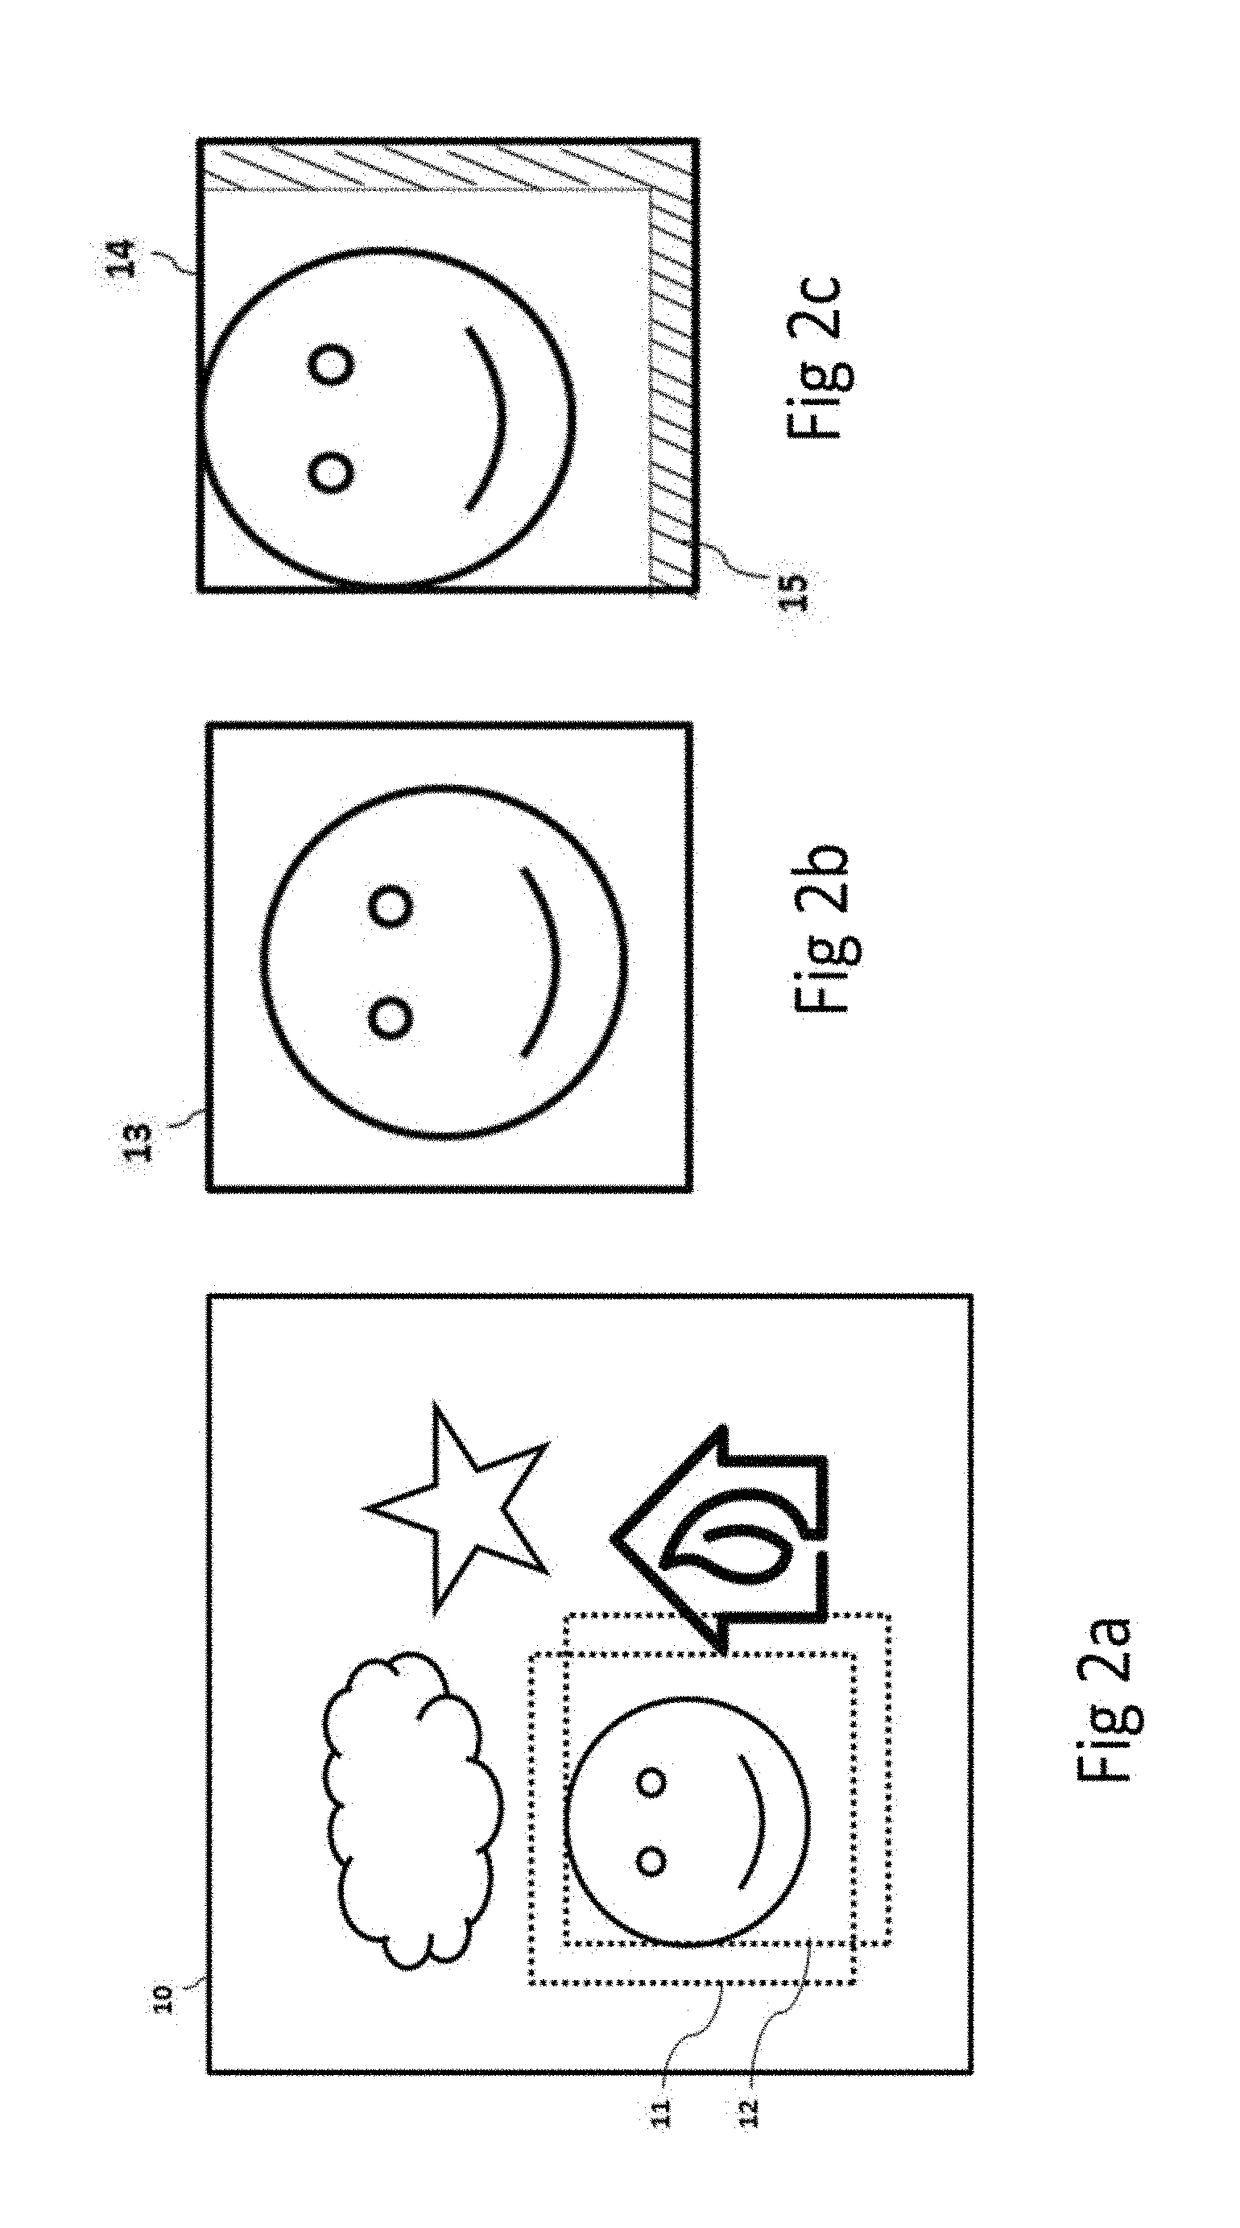 Method and Apparatus for Managing Latency of Remote Video Production